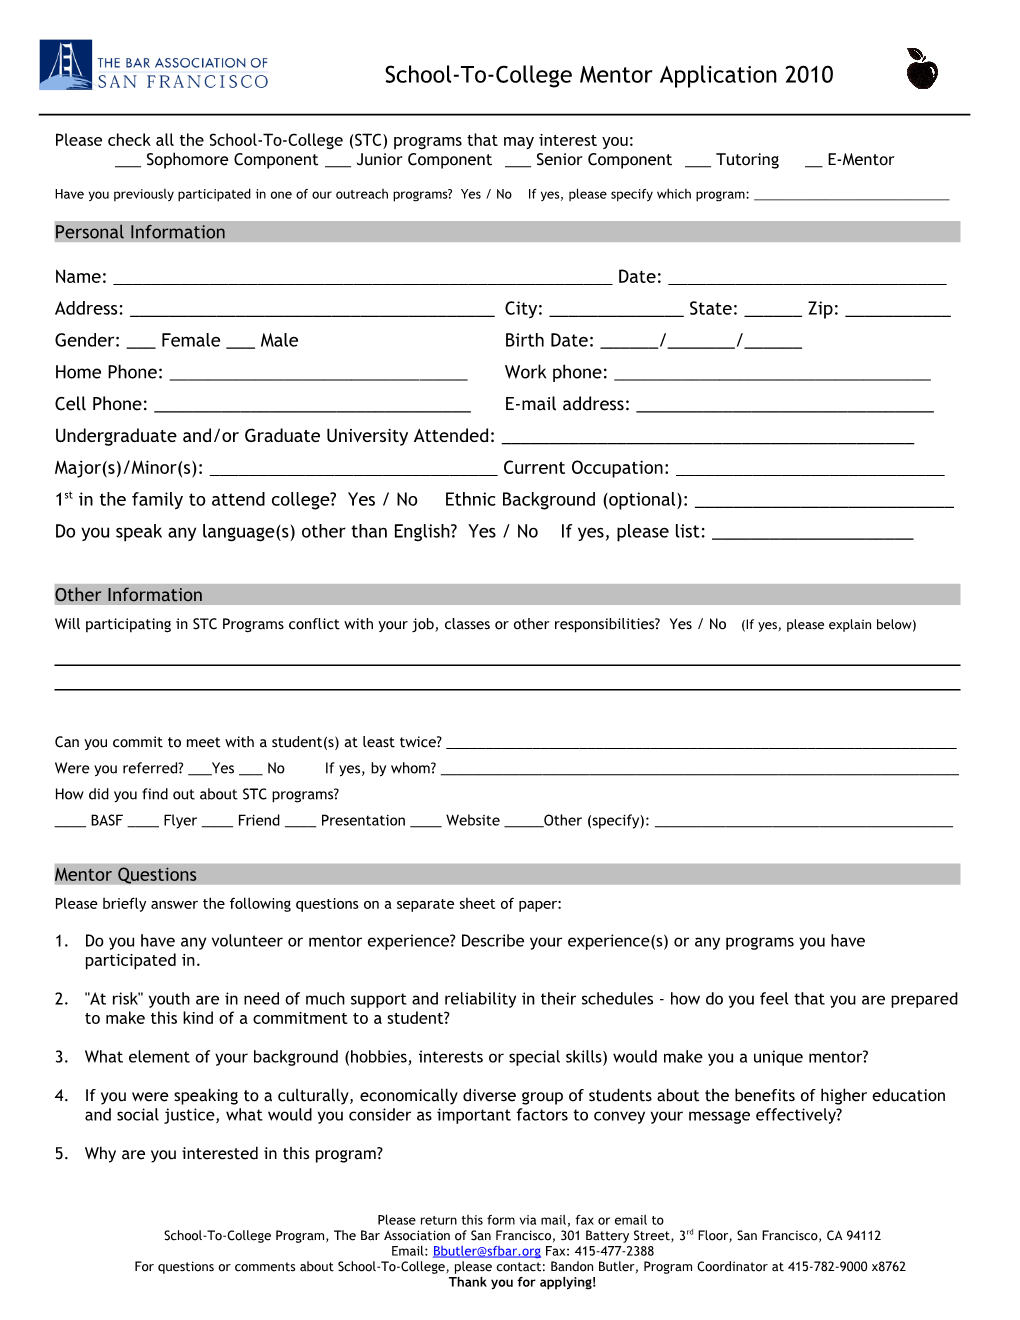 School-To-College Mentor Form